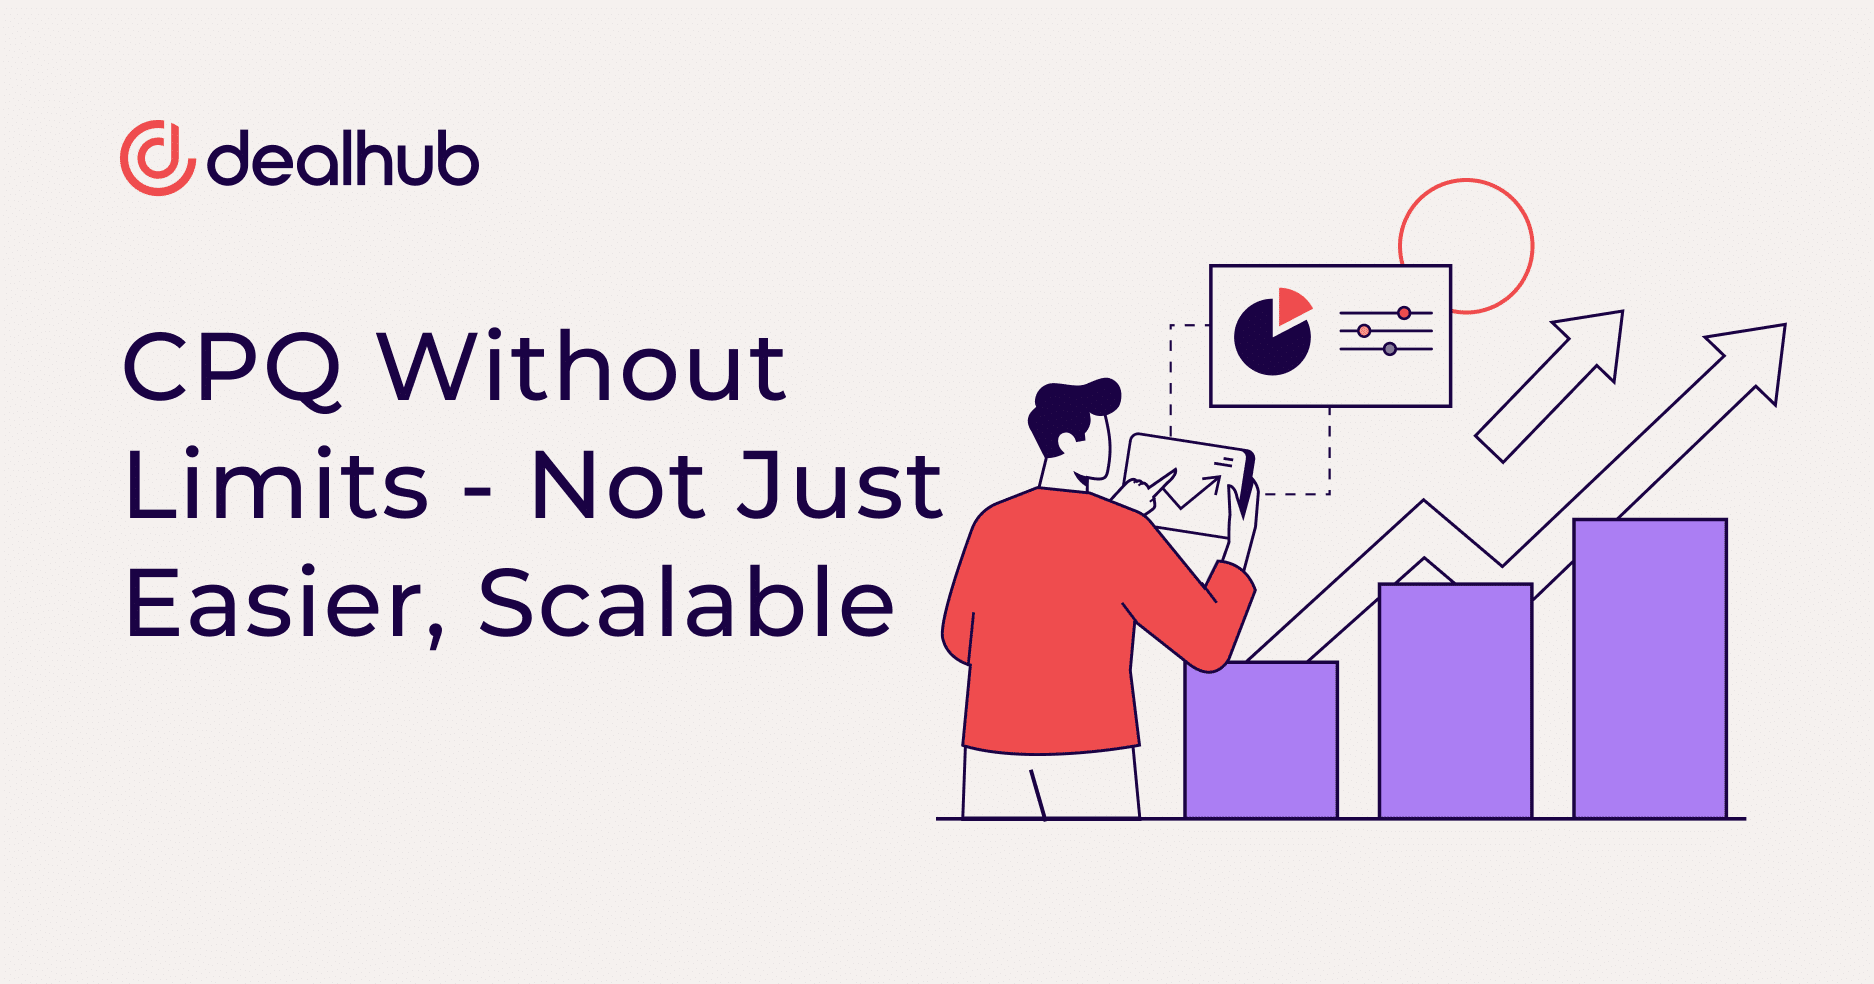 CPQ Without Limits -Not Just Easier, Scalable.